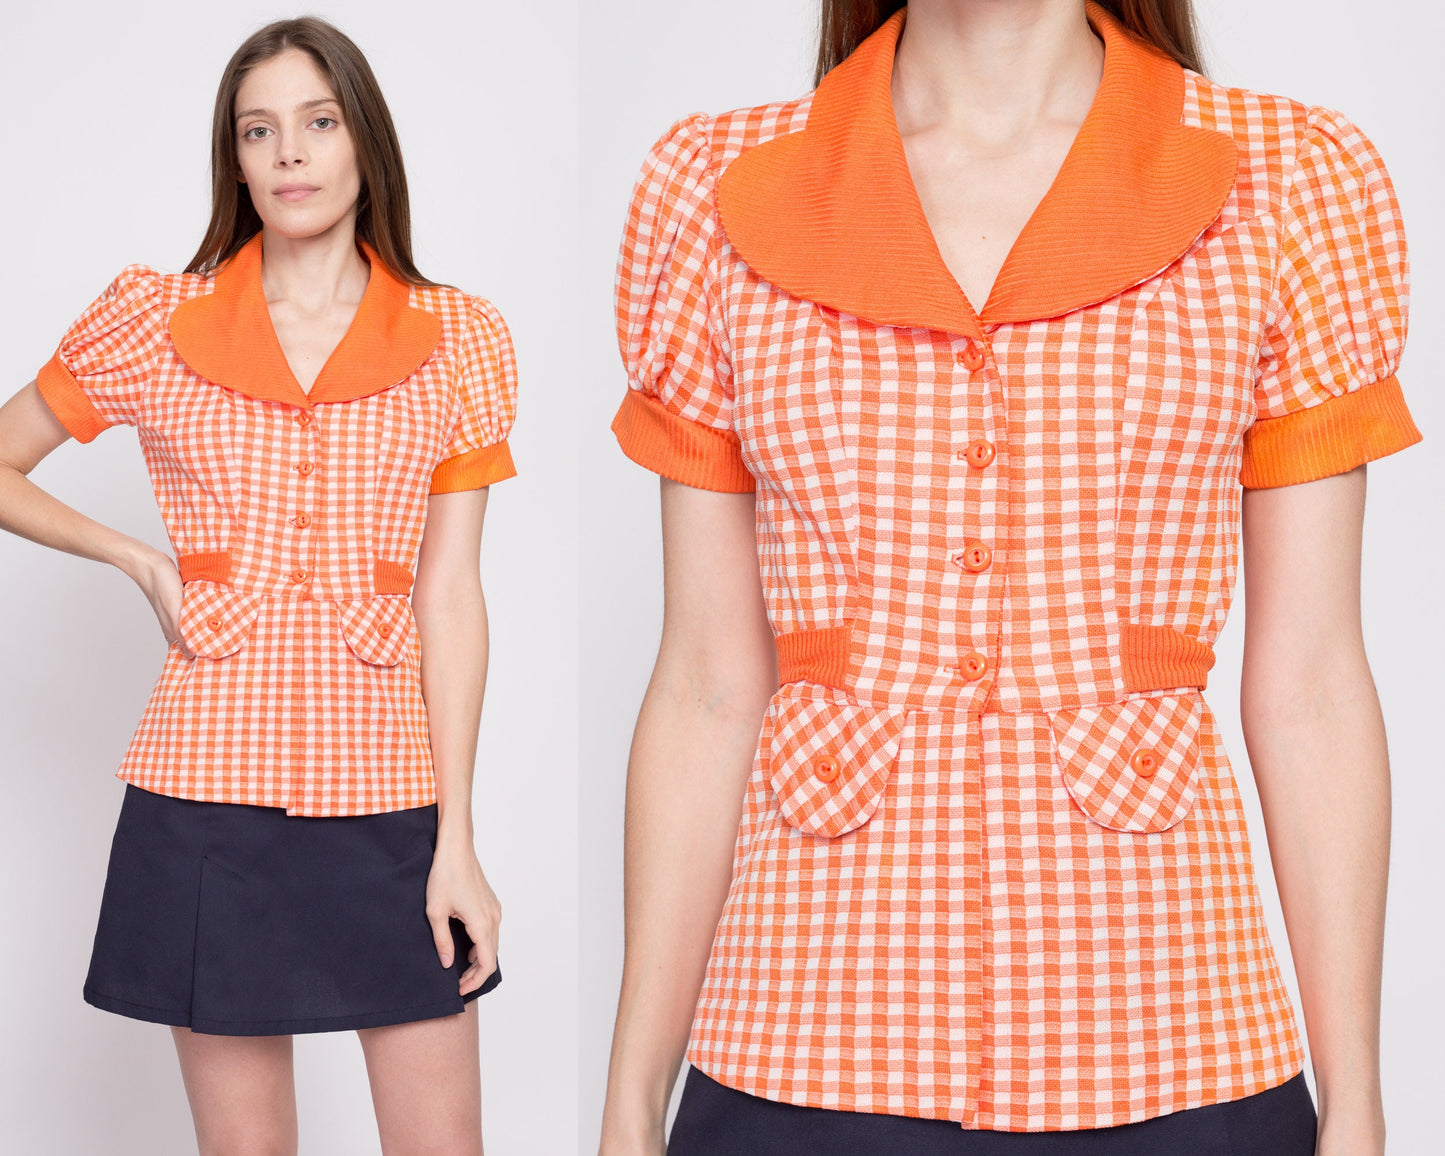 70s Orange Gingham Puff Sleeve Top - Small | Retro Vintage Petal Collar Button Up Collared Shirt